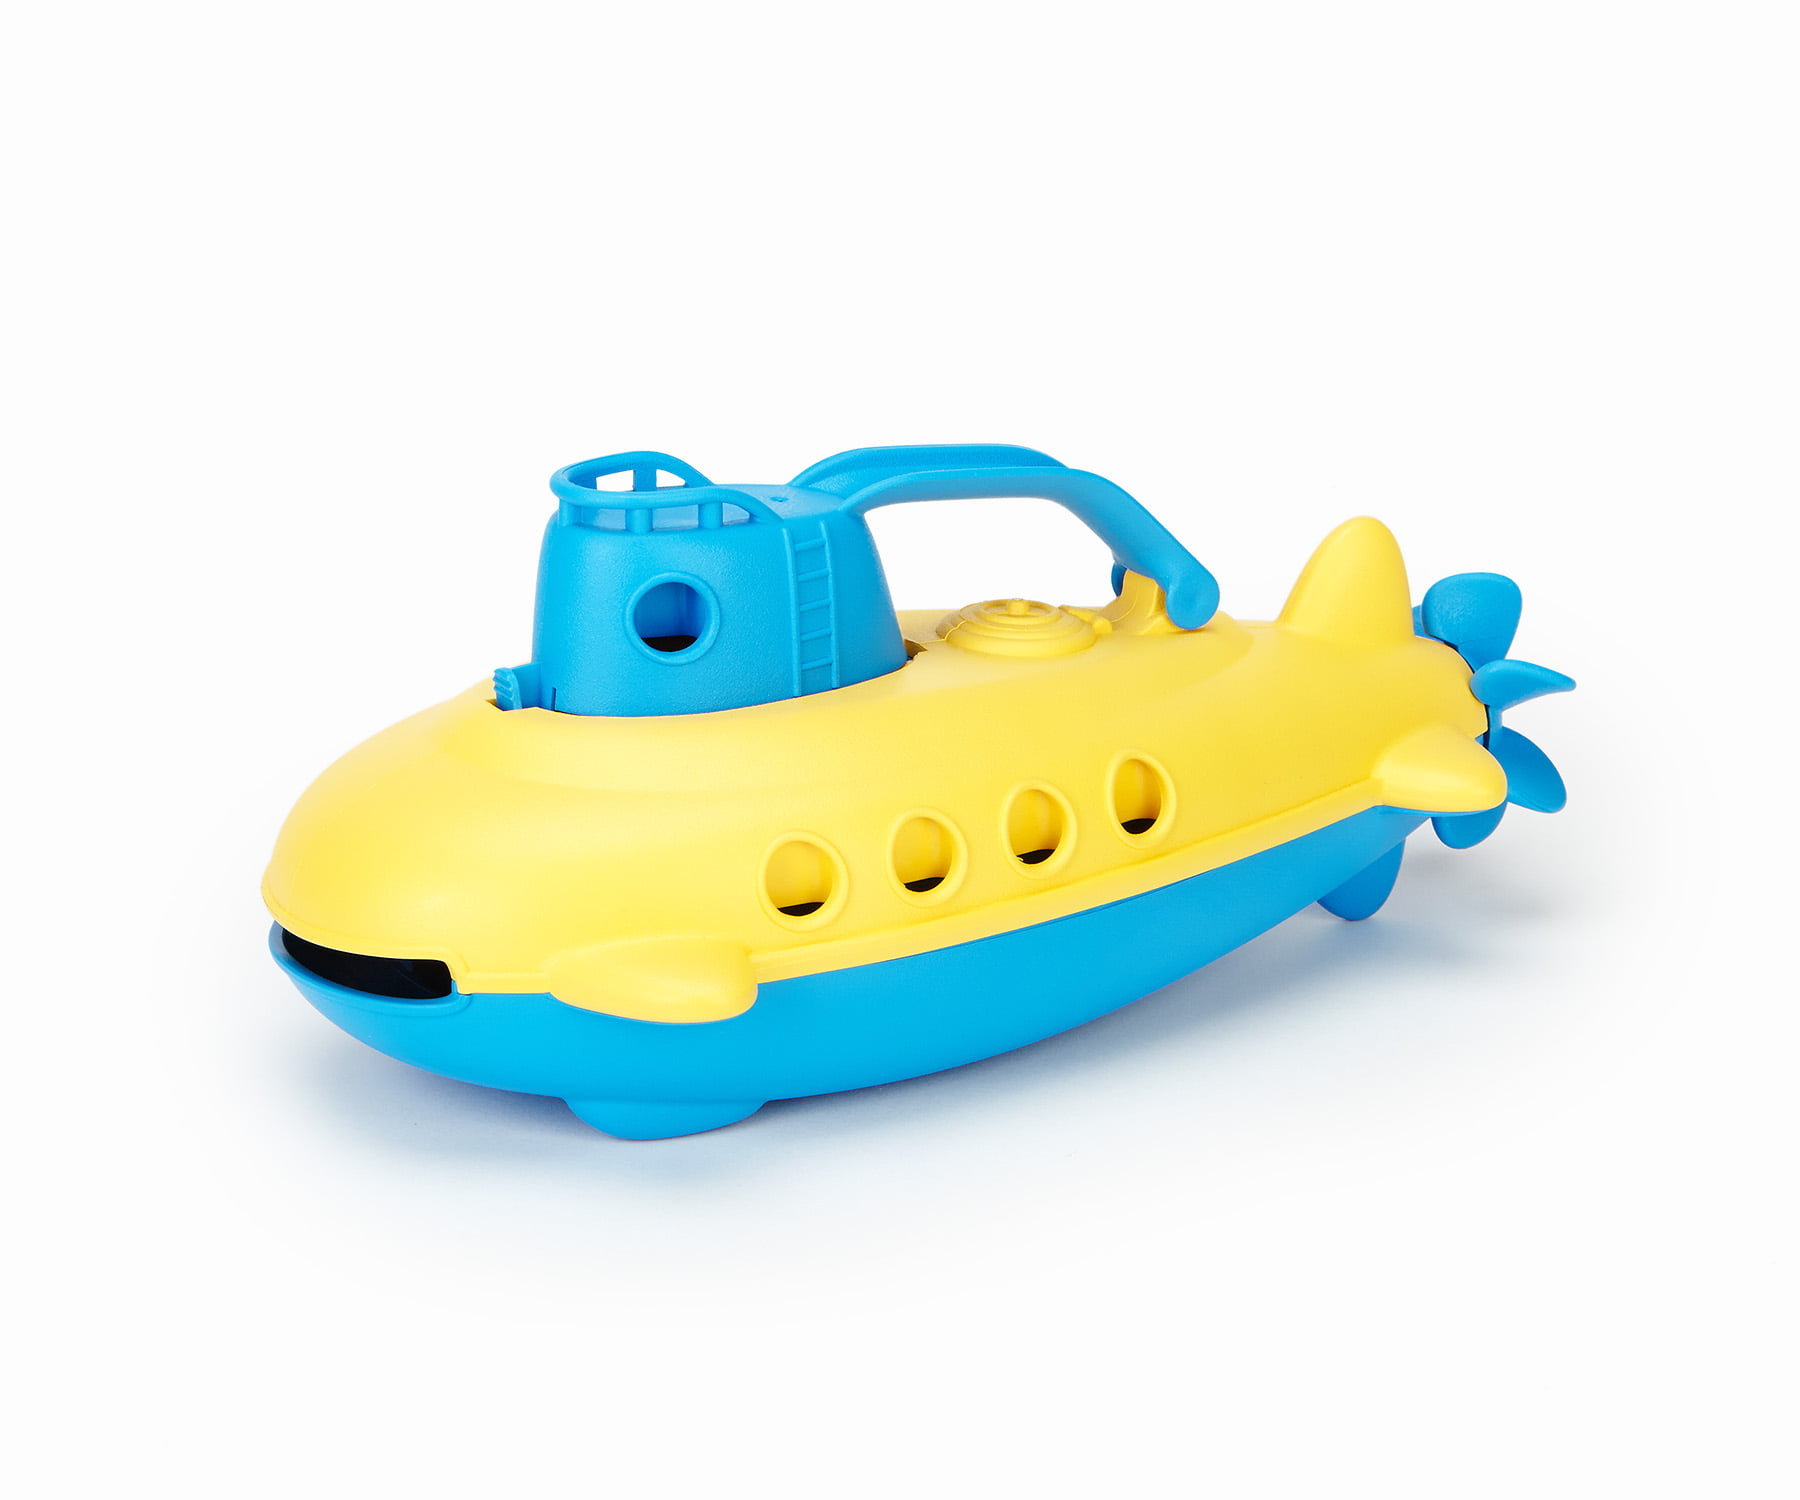 Bath Toy with Spinning Rear Propeller Safe Toys for Toddlers Submarine in Yellow & Blue Babies Phthalate Free BPA Free